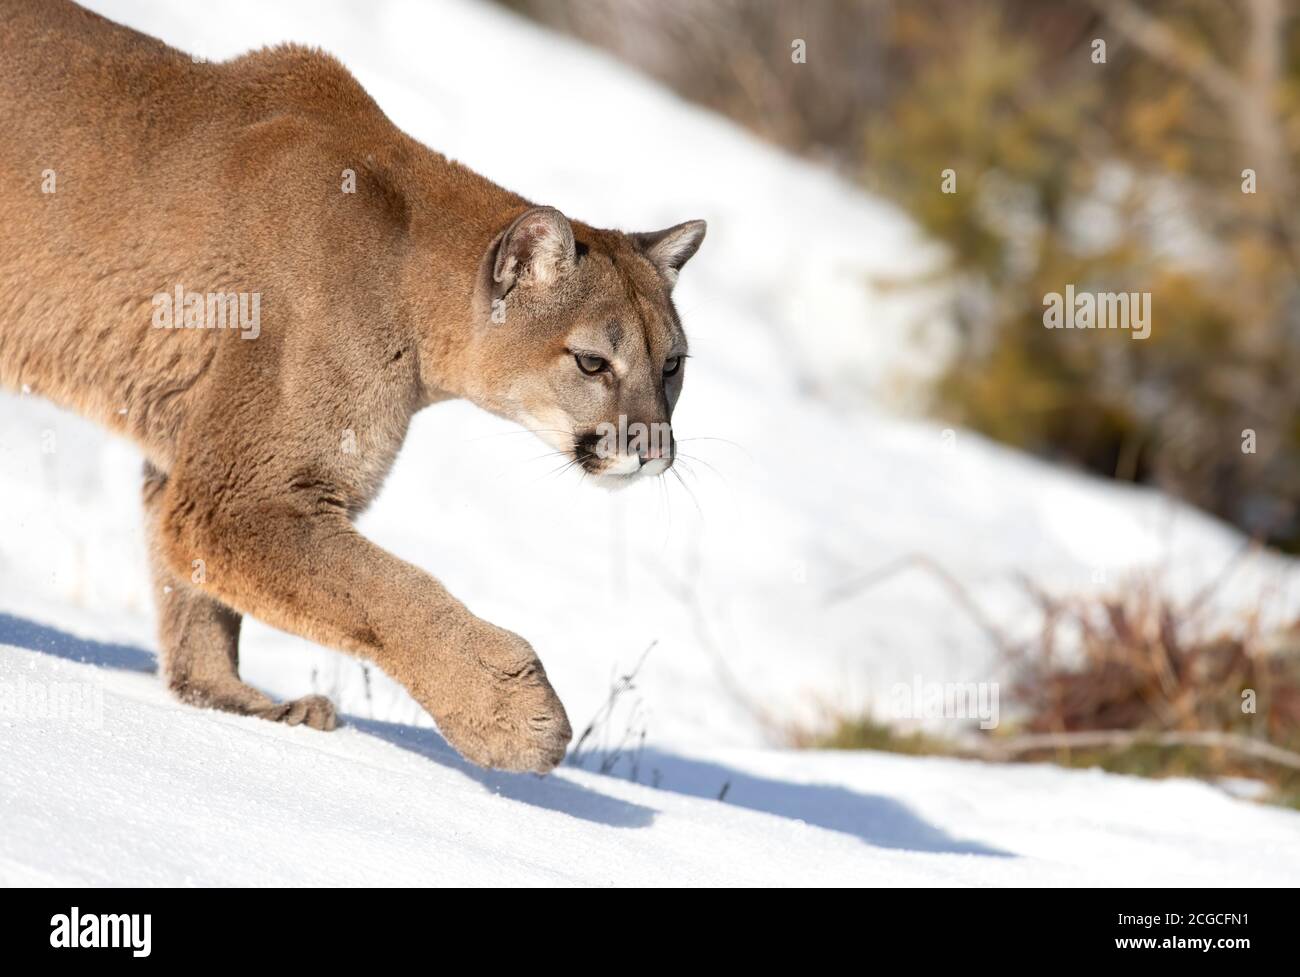 Cougar or Mountain lion (Puma concolor) walking through the mountains in  the winter snow in Montana, USA Stock Photo - Alamy